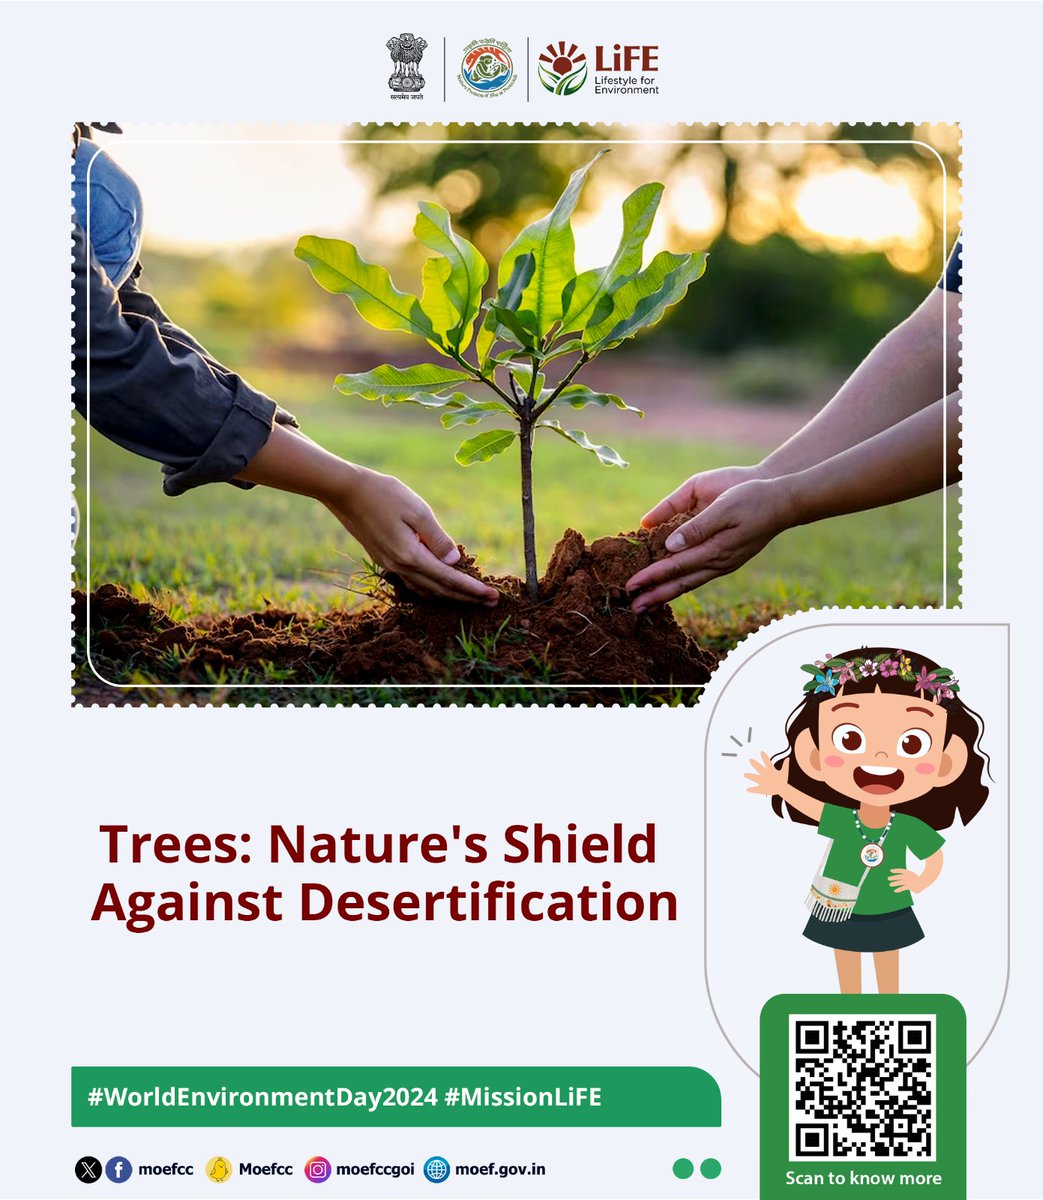 Trees combat desertification by stabilizing soil, retaining moisture, reducing erosion, providing shade, and promoting biodiversity. Plant trees to protect our land and secure a sustainable future. #MissionLiFE #WED2024 #Plant4Mother @SCRailwayIndia @RailMinIndia